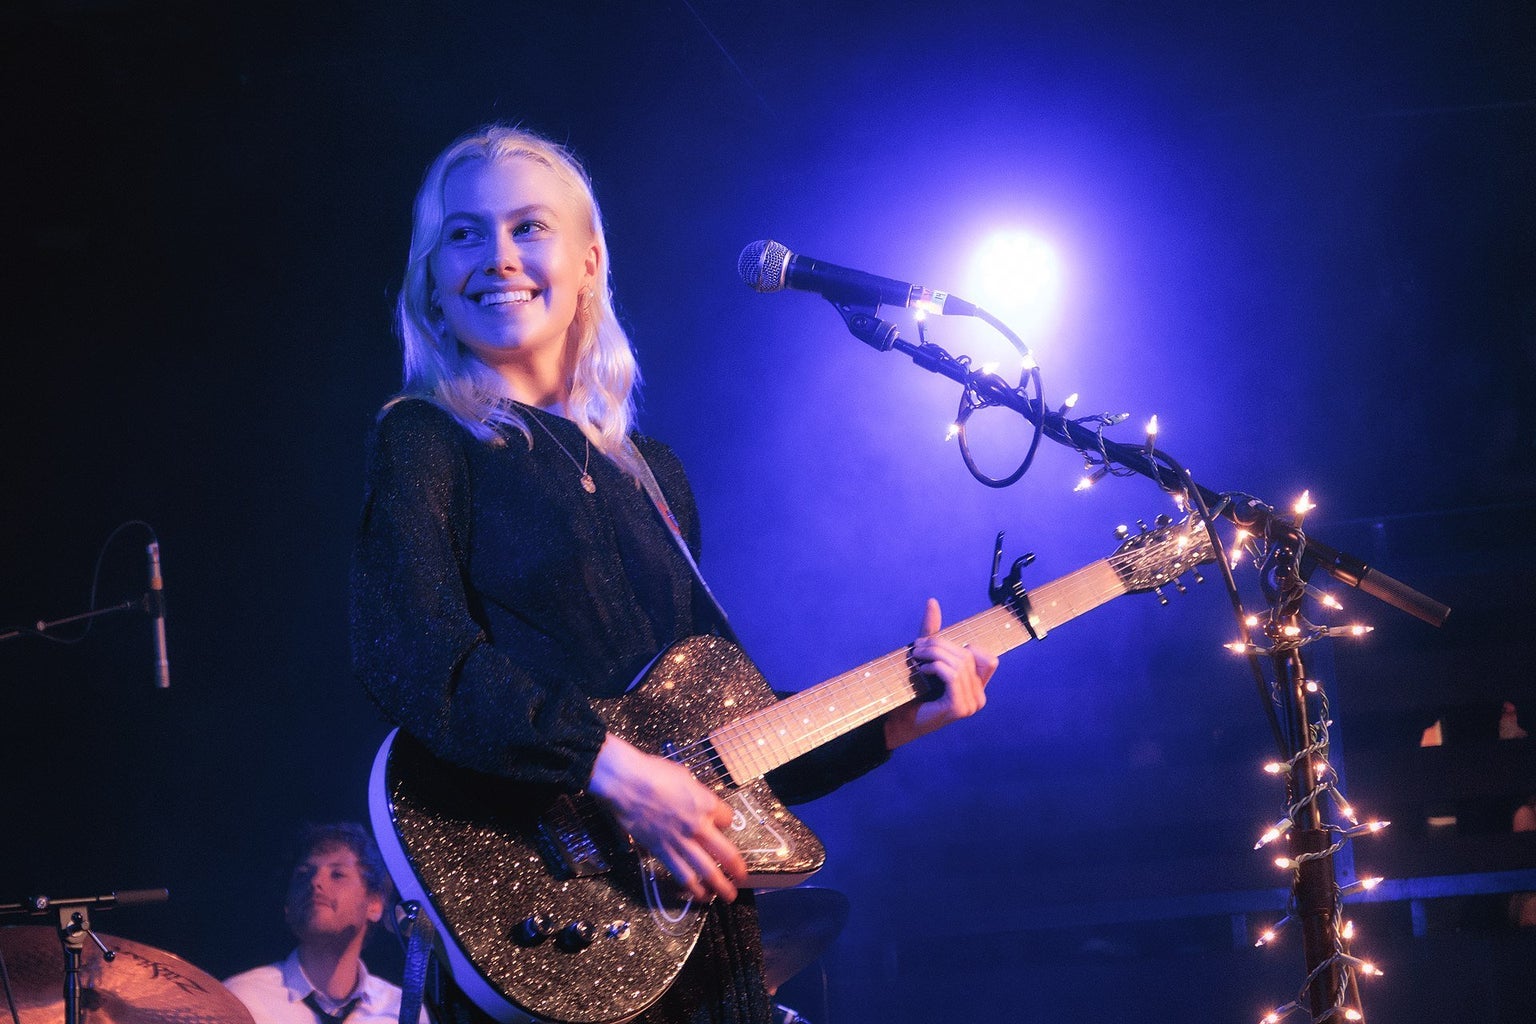 Phoebe Bridgers at the mic with her guitar, playing a live show.